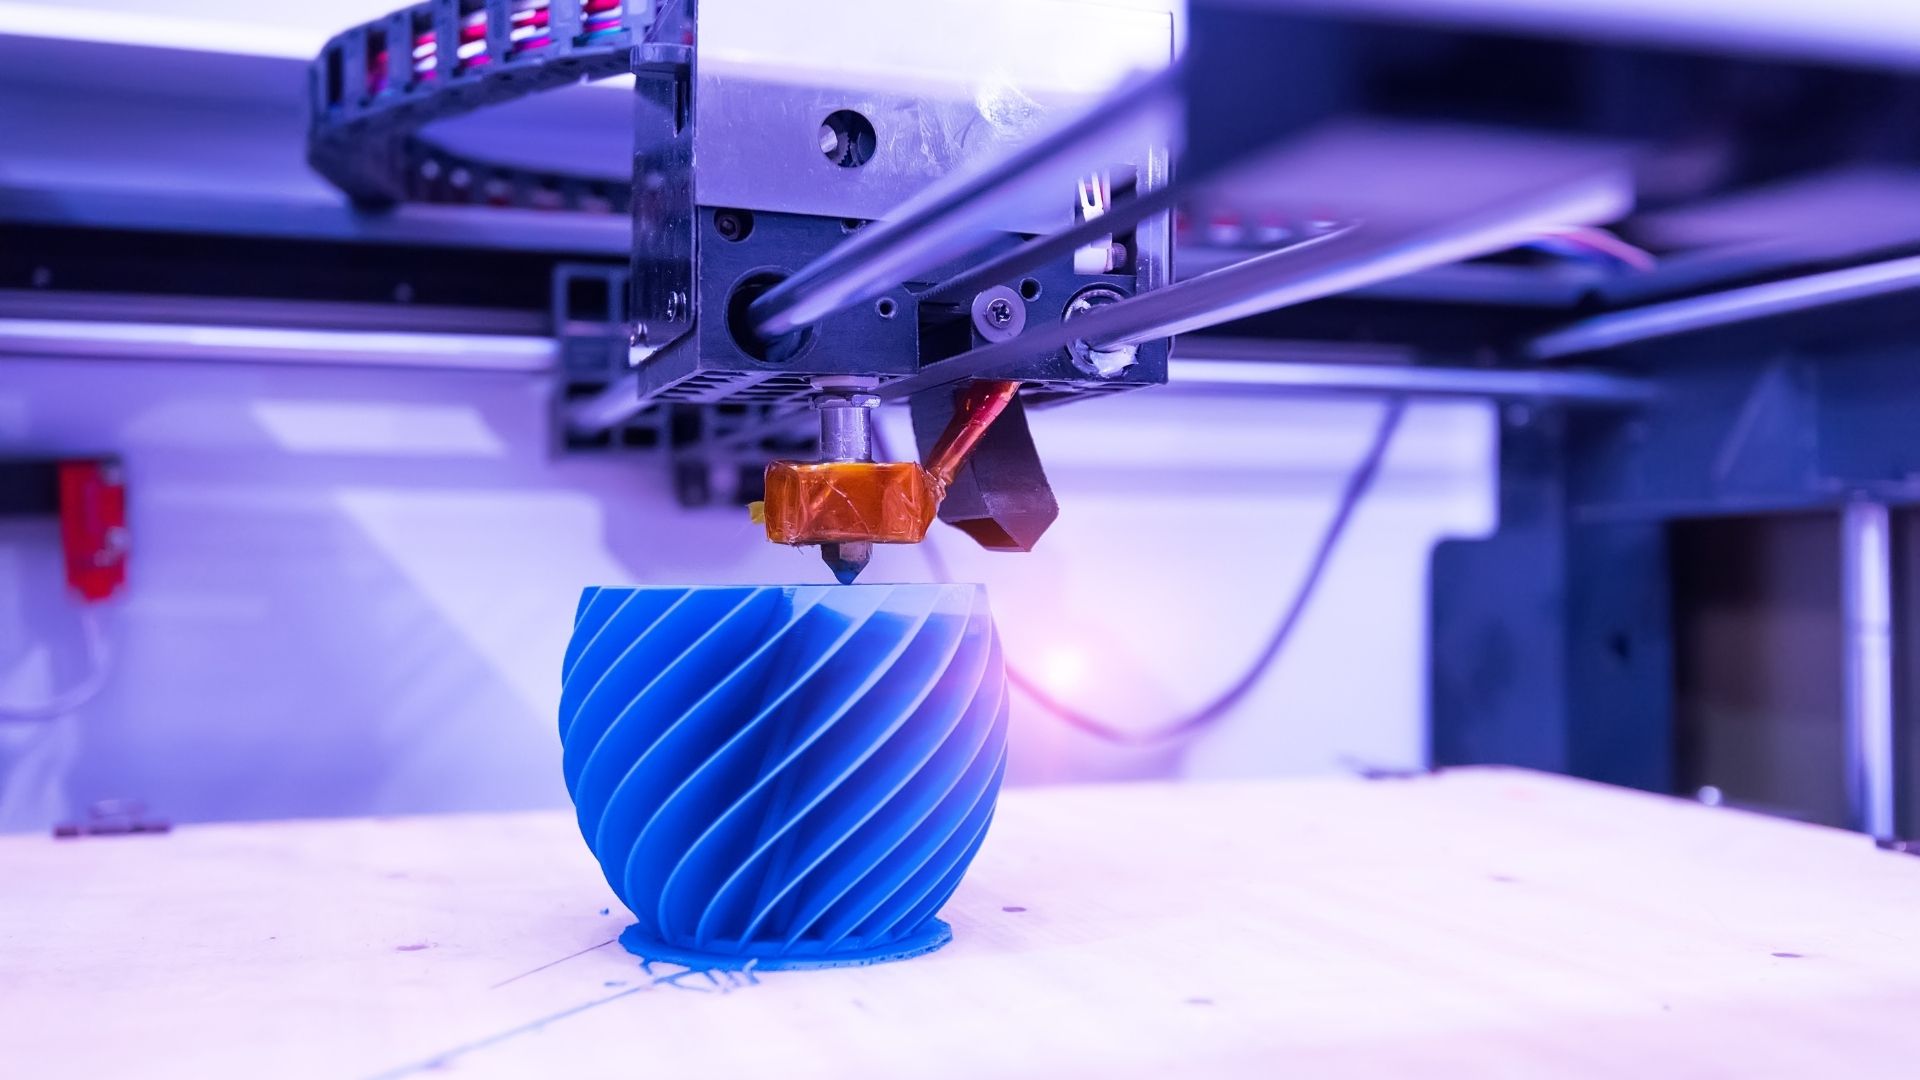 What Is the Strongest 3D Printing Filament?